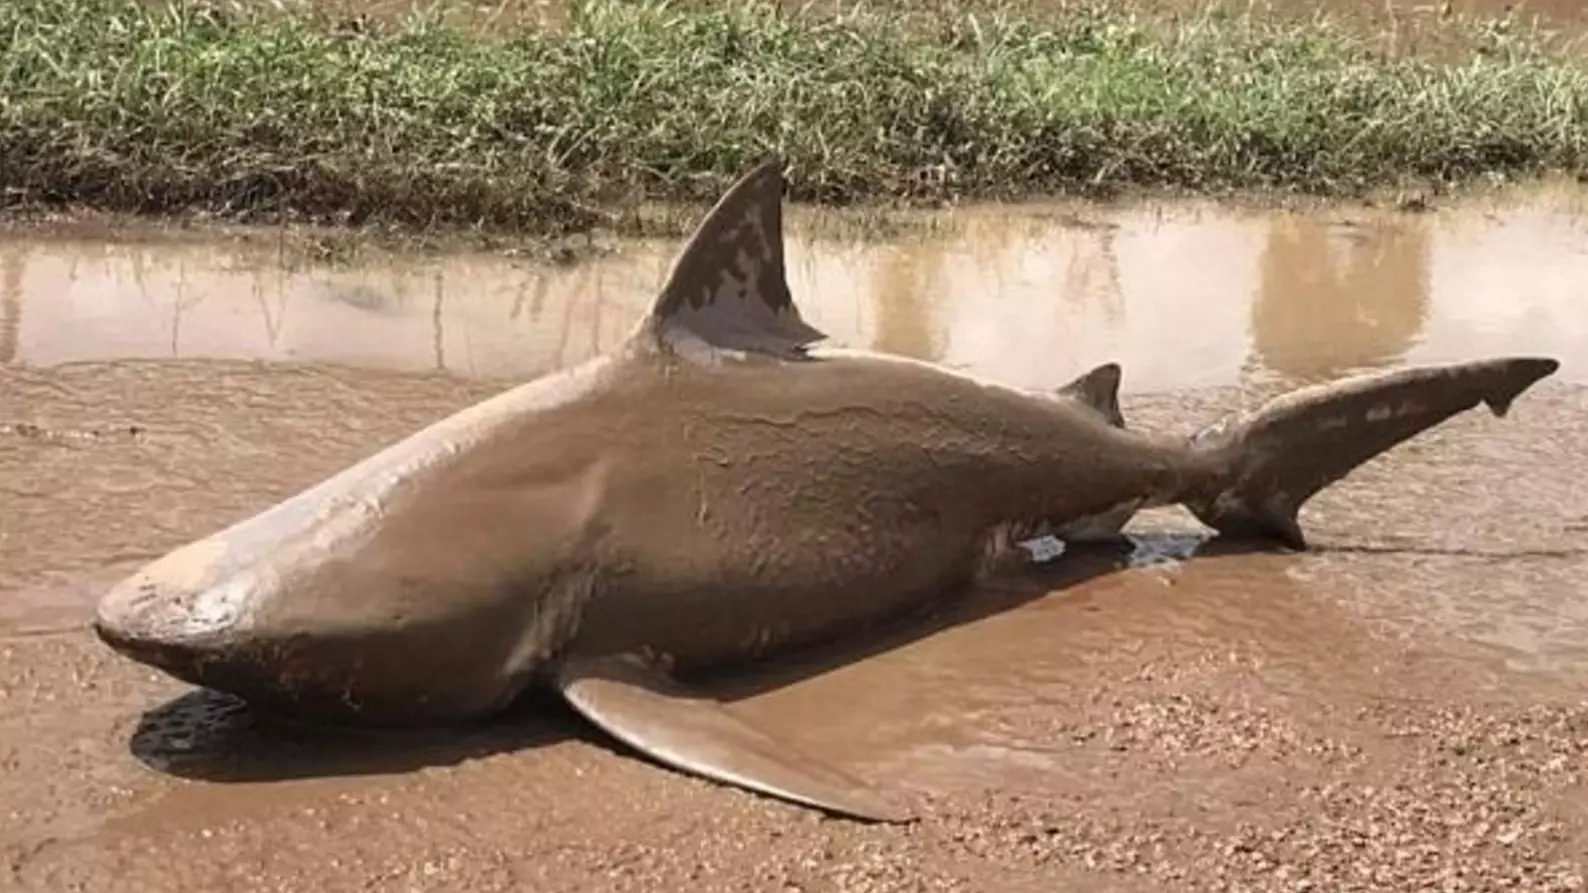 Another Bull Shark Washes Up In Australia After Cyclone Debbie